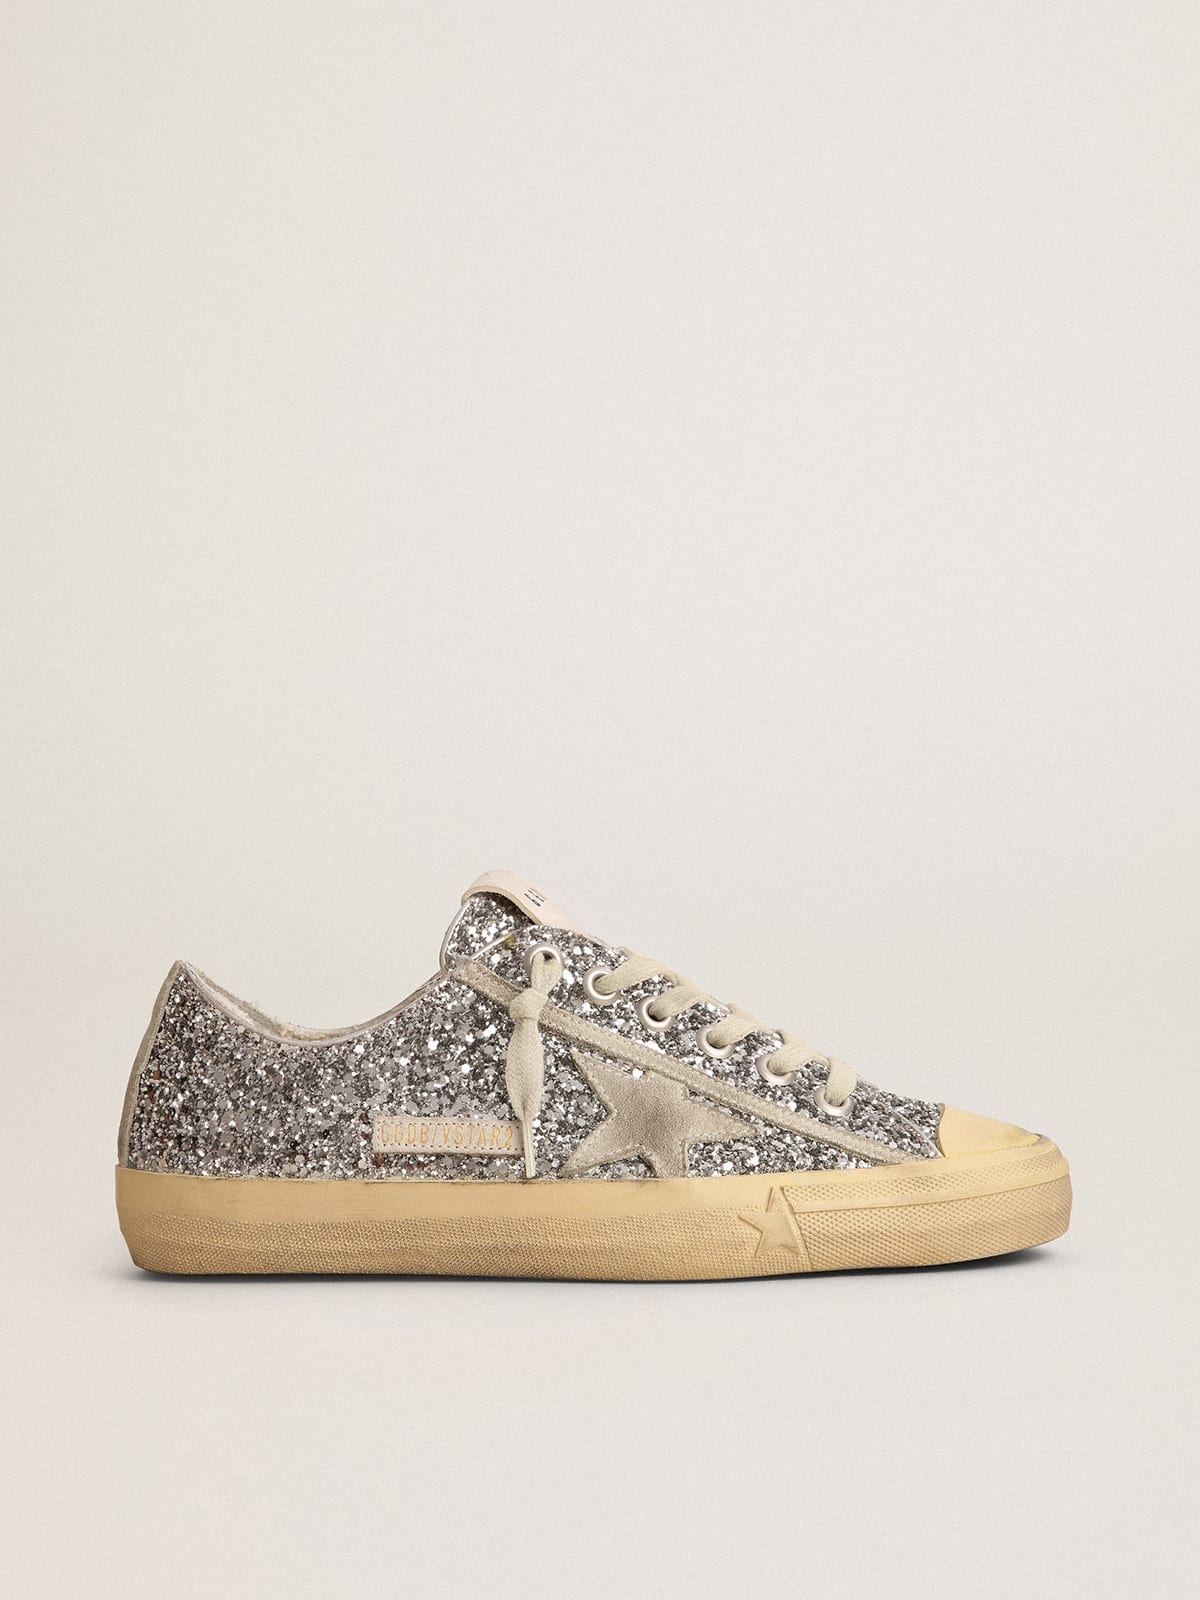 V-Star LTD sneakers in silver glitter with ice-gray suede star - 1